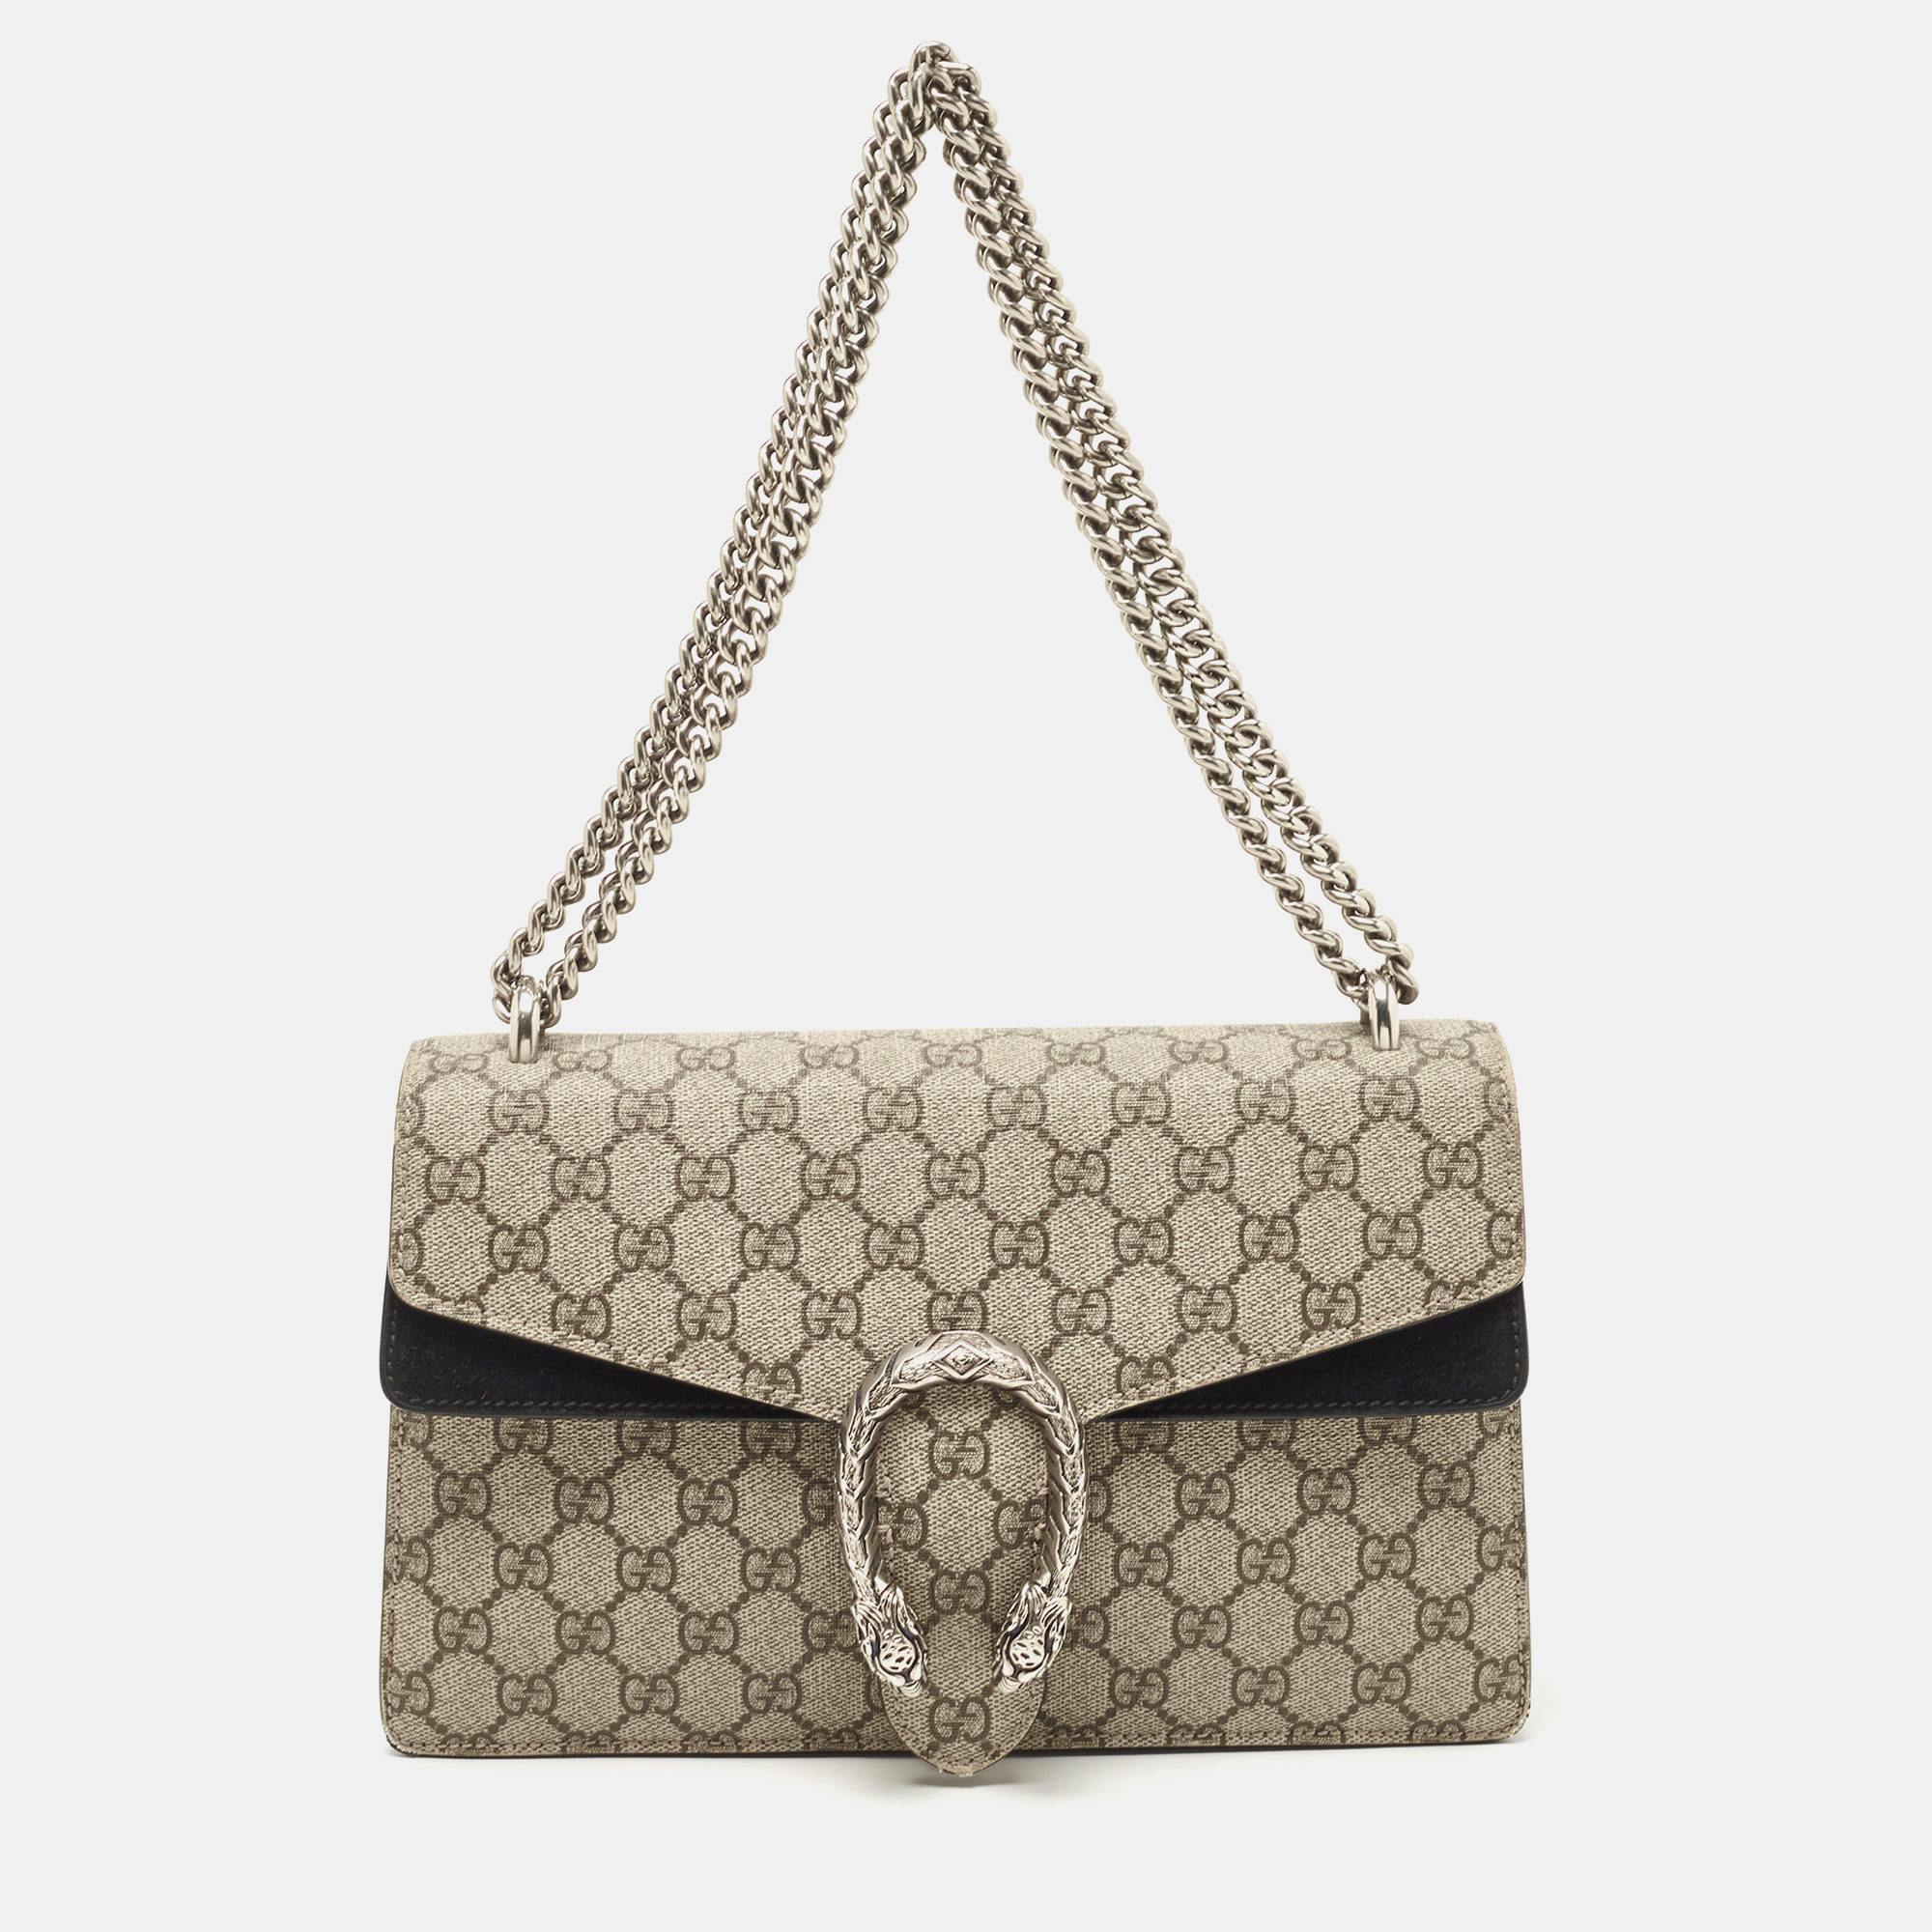 Gucci Beige GG Supreme Canvas And Suede Small Dionysus Shoulder Bag